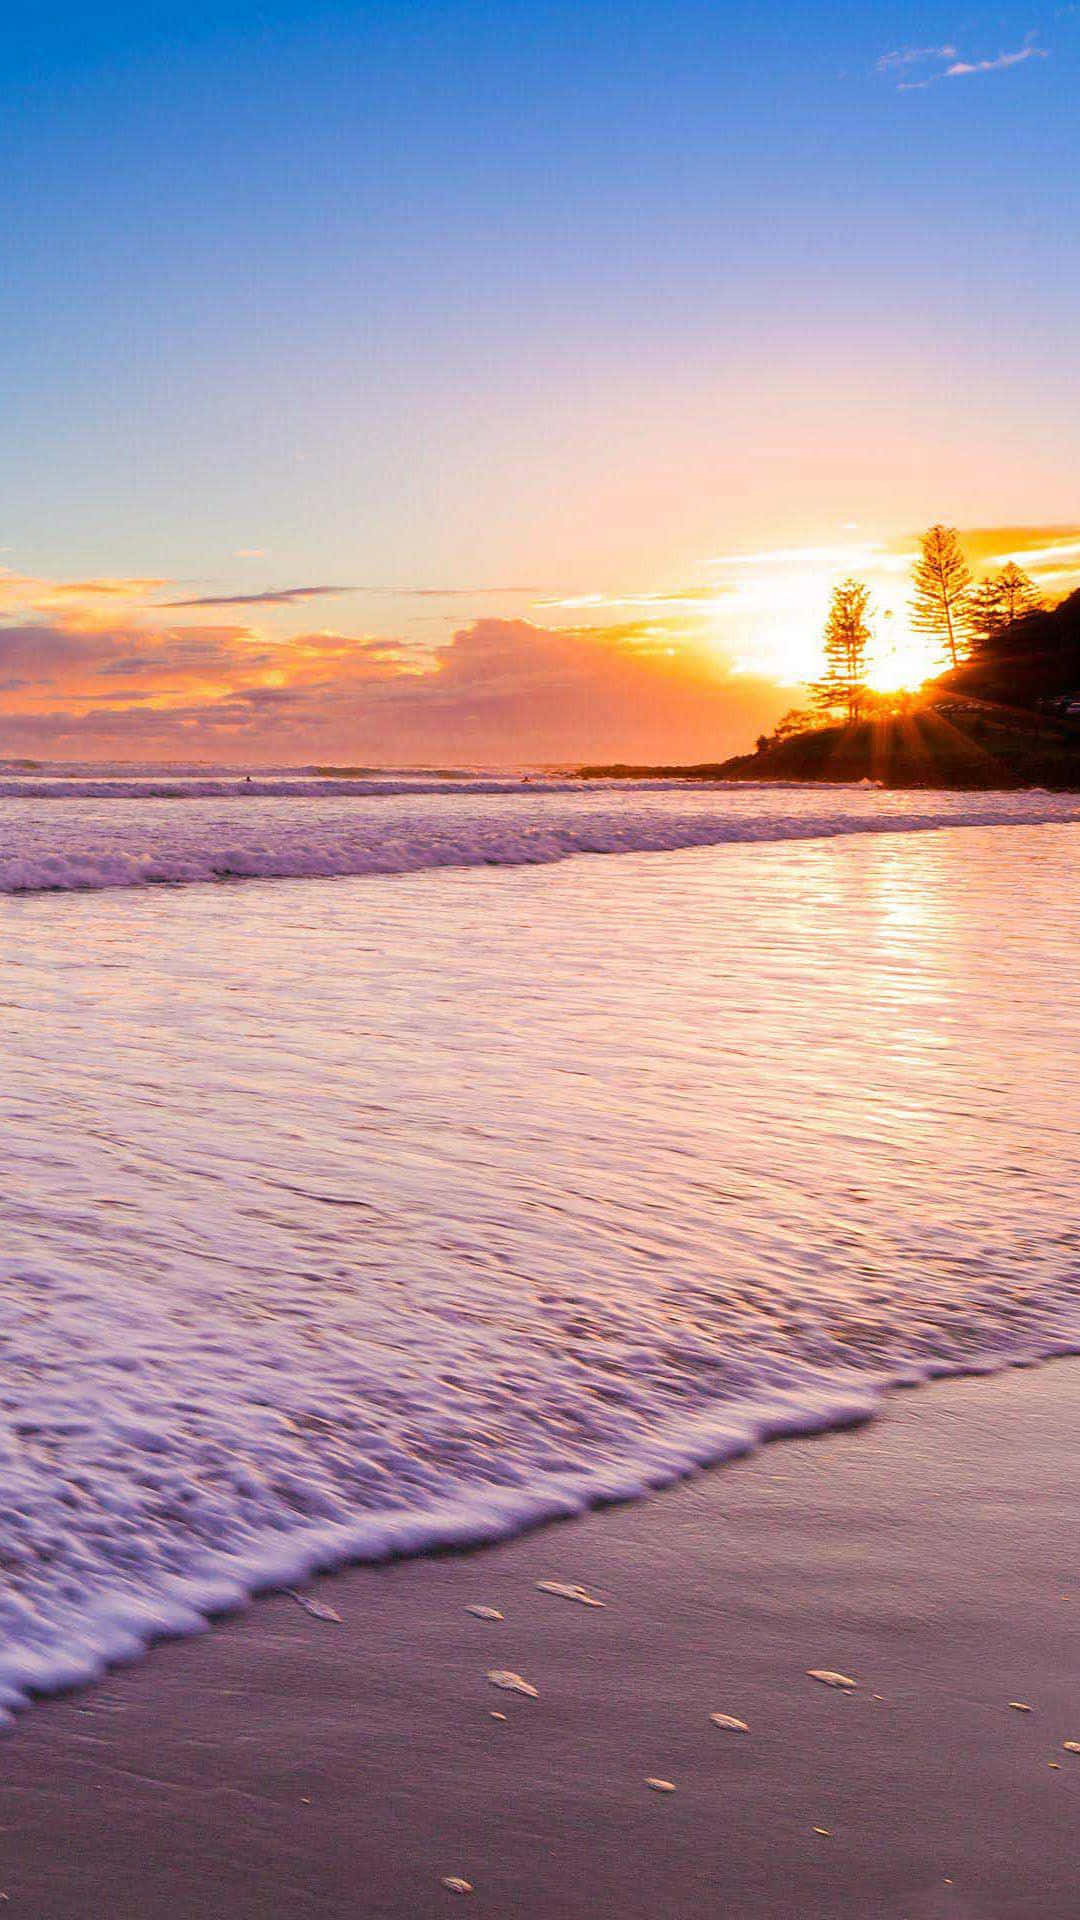 Need to make an important phone call? Take advantage of the tranquil beach setting. Wallpaper